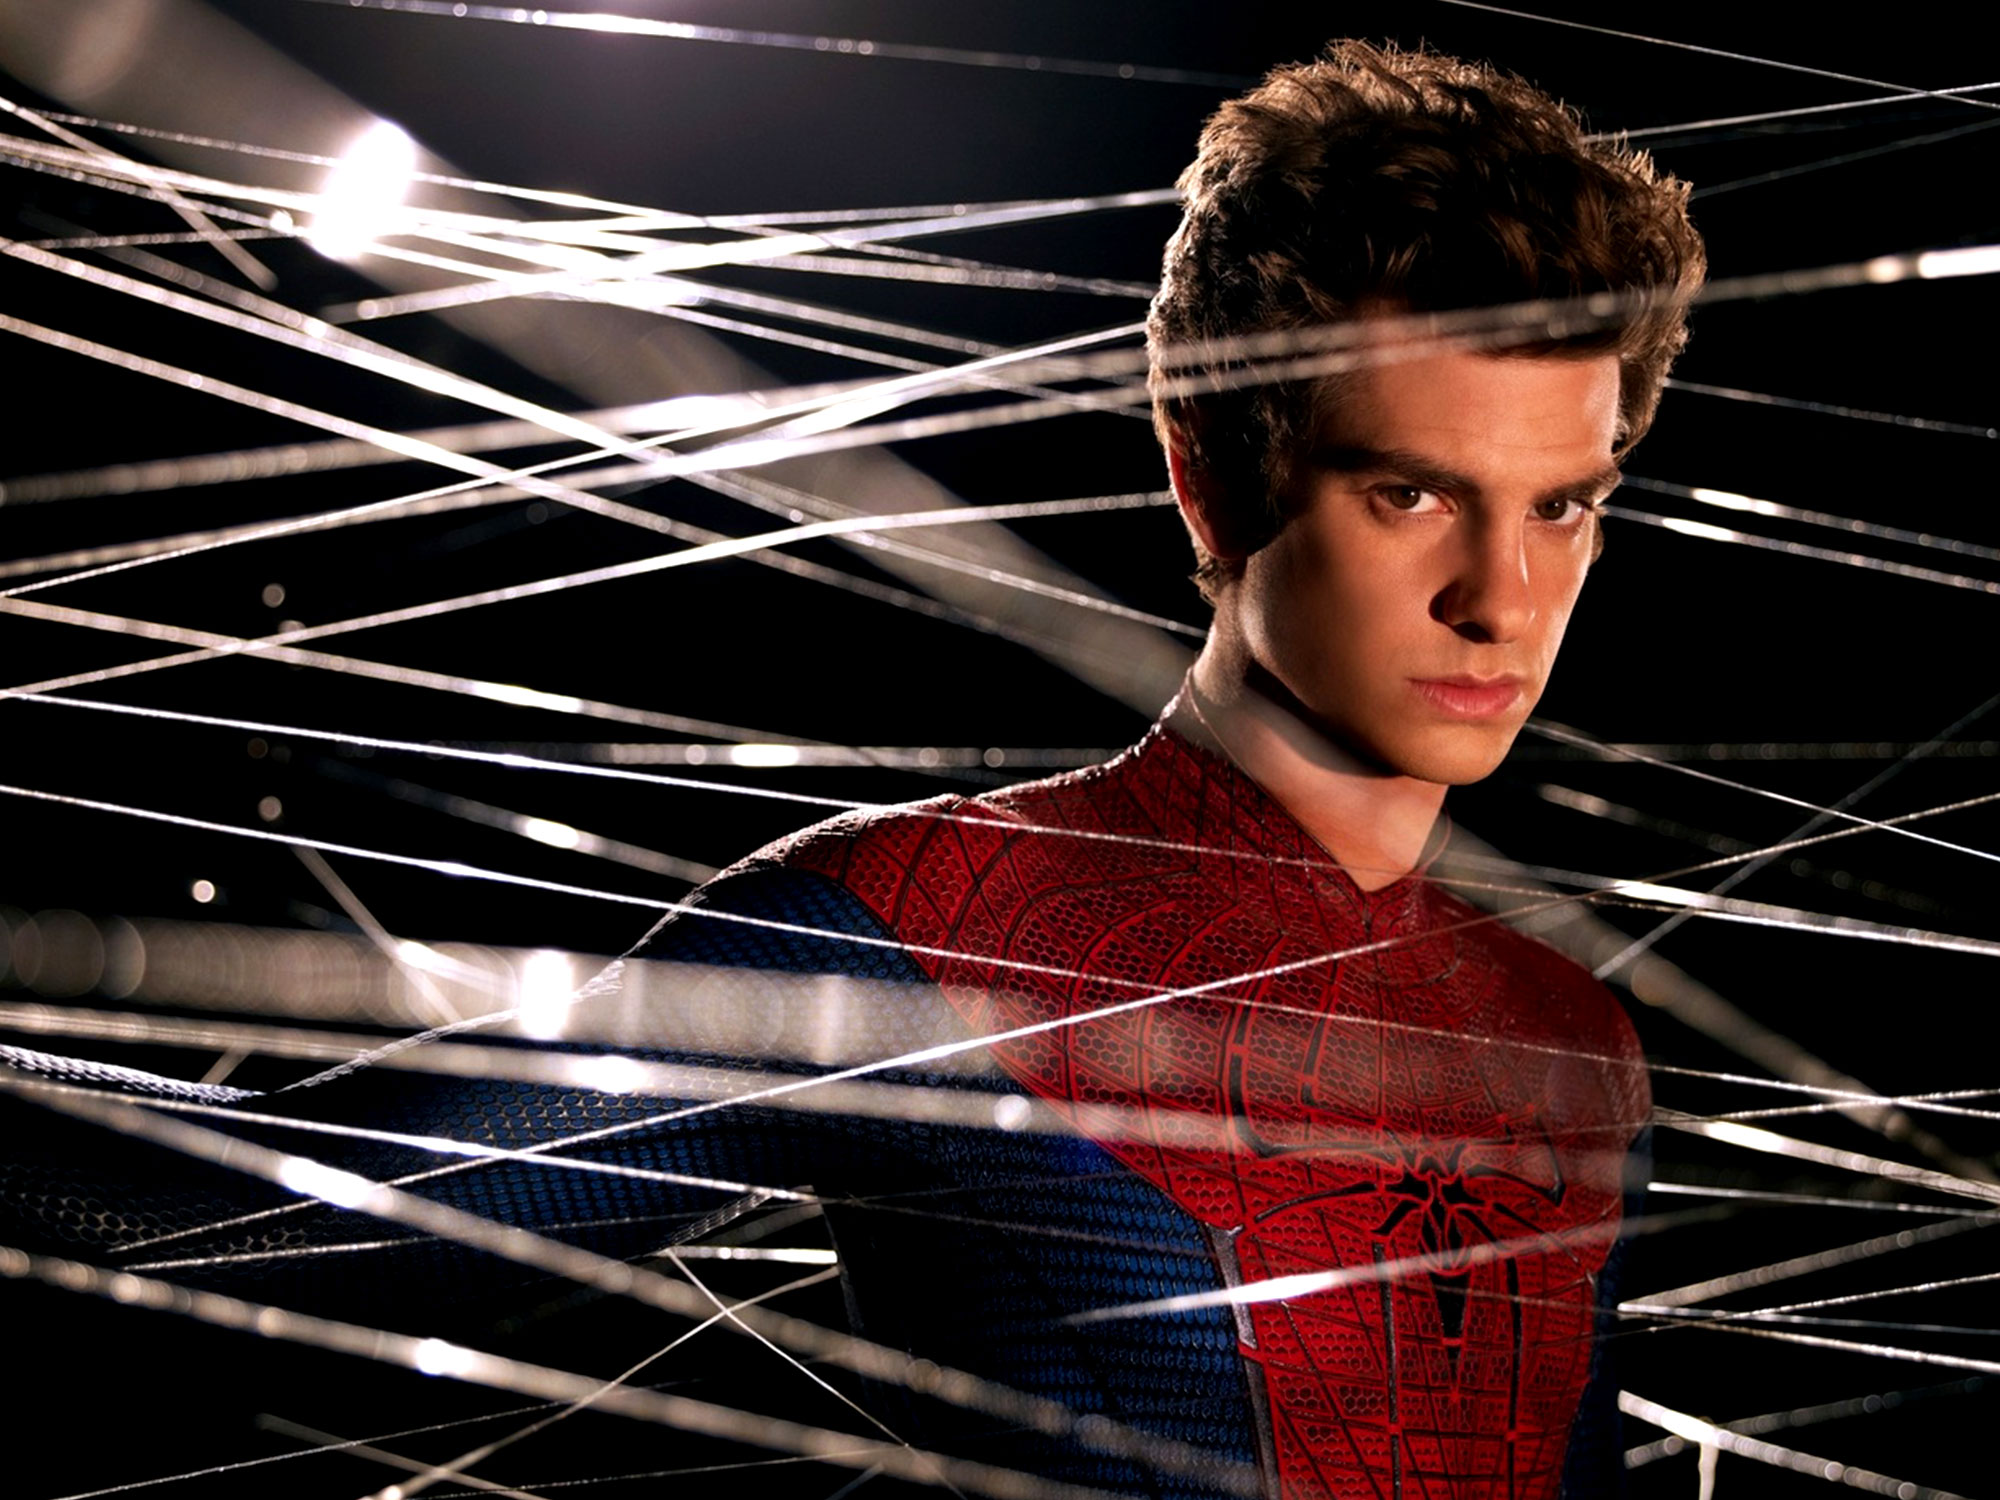 Where Can I Watch The Andrew Garfield Spider Man Movies The Amazing Spider-Man - Little White Lies